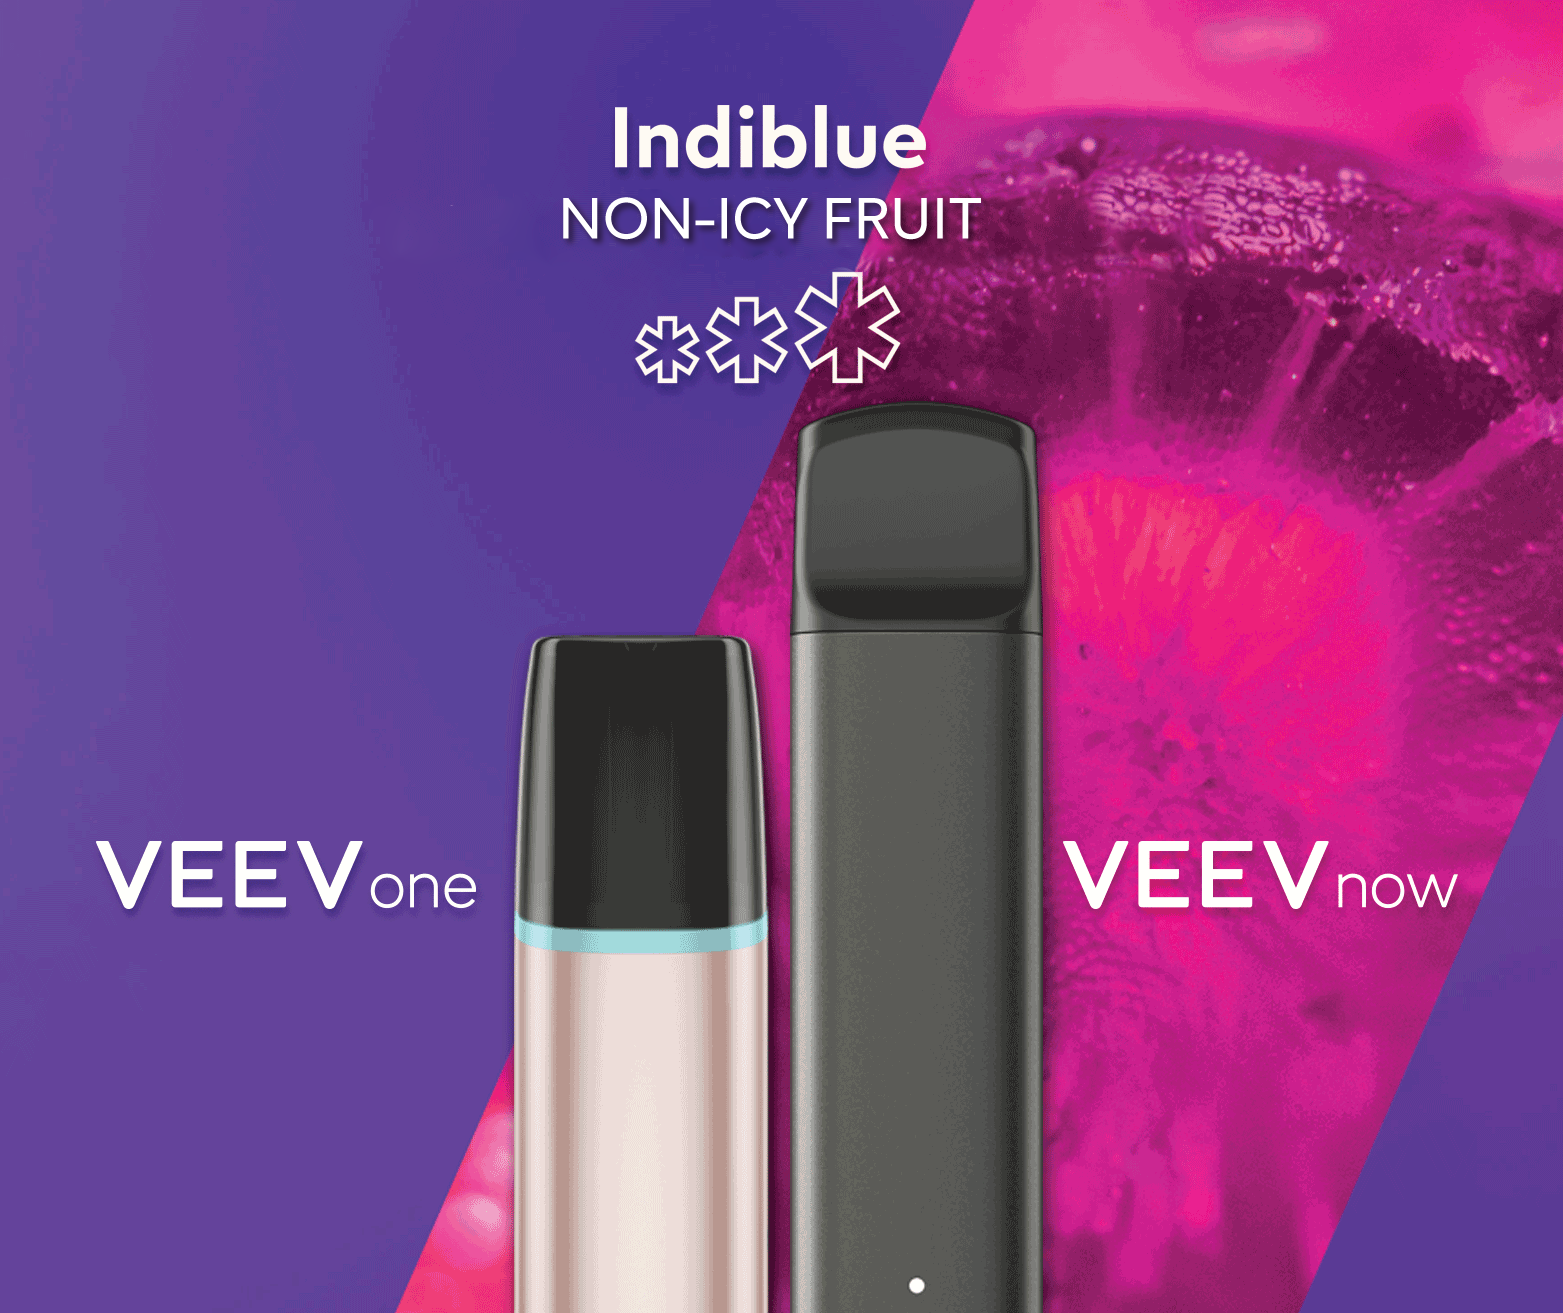 A VEEV ONE pod device and VEEV NOW disposable, both in Indiblue flavour.